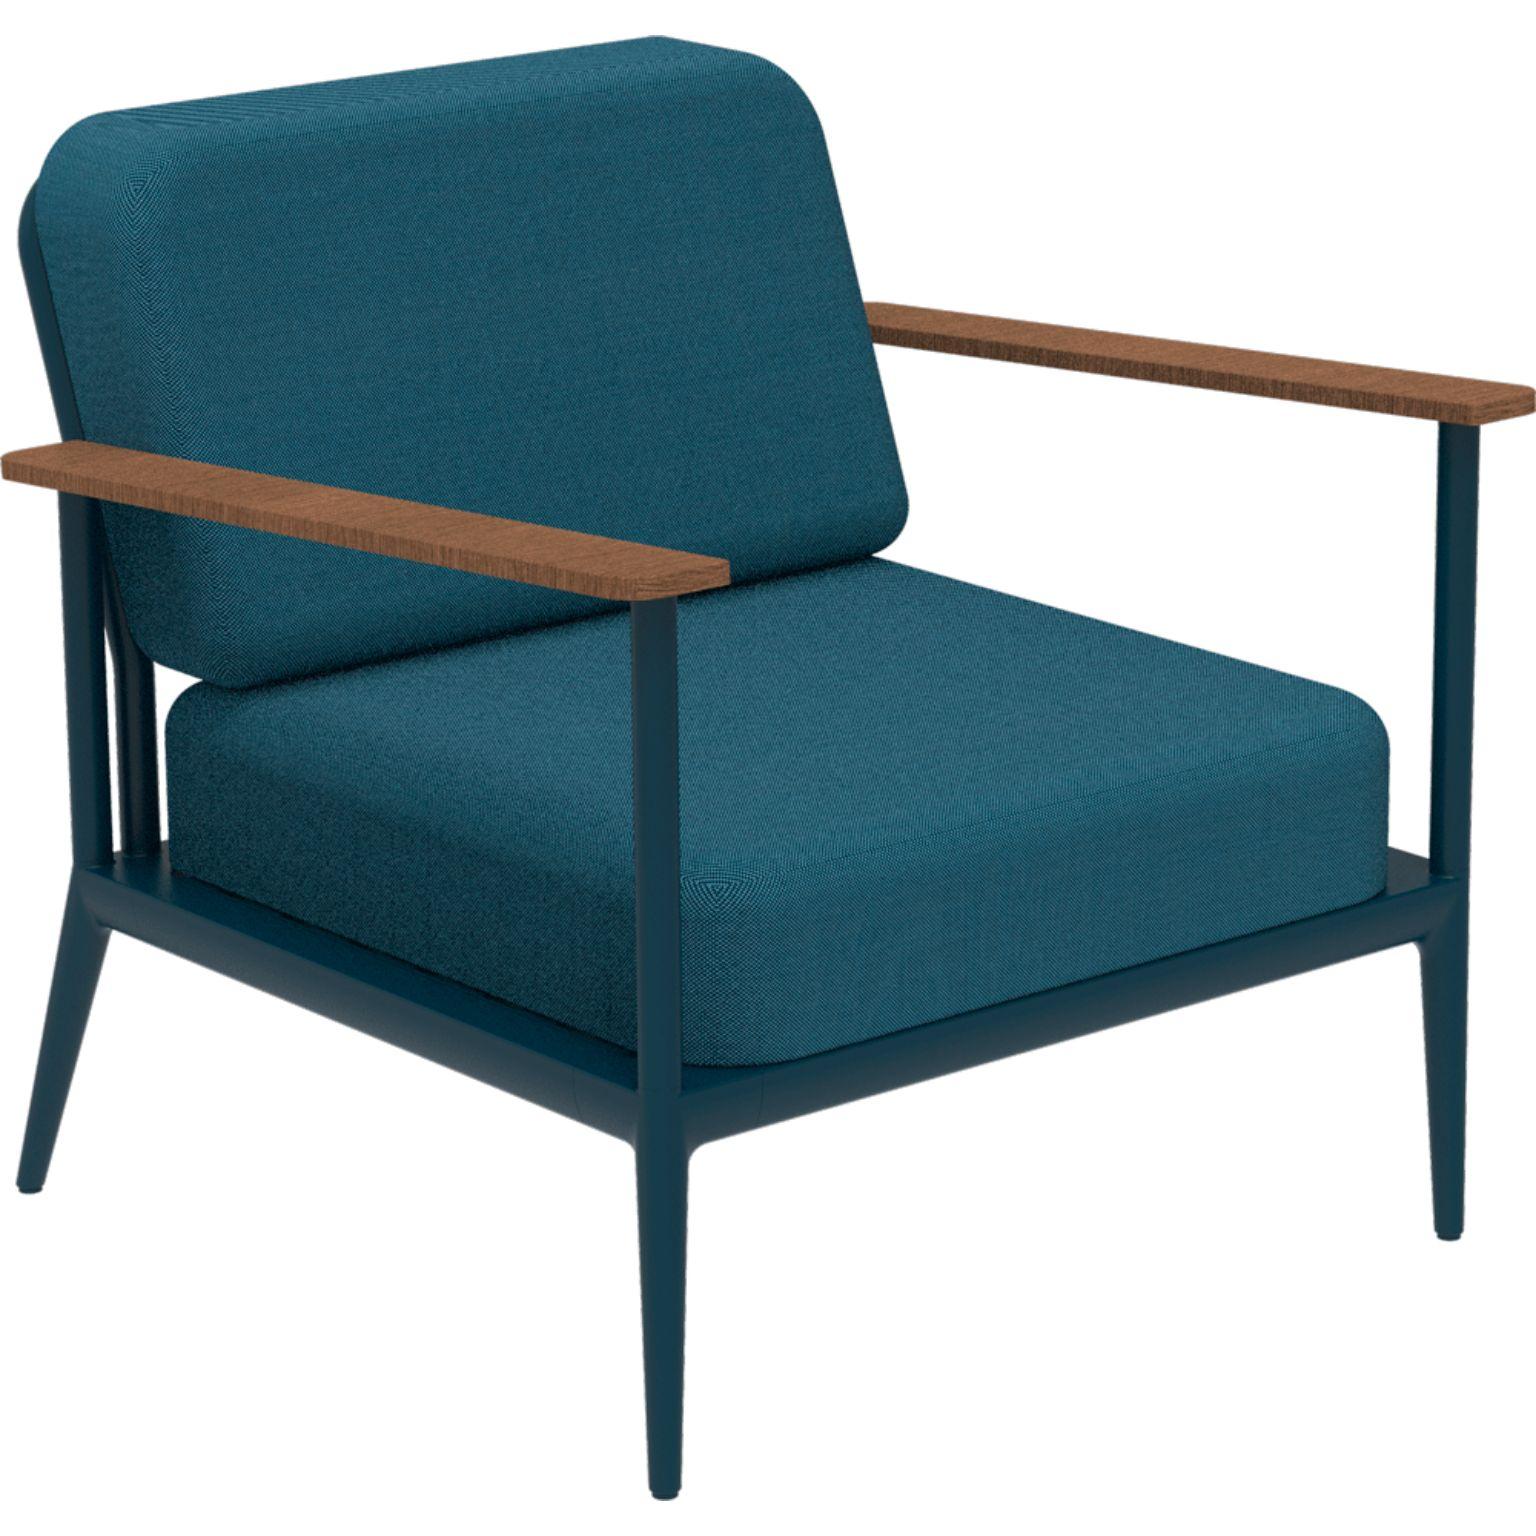 Nature navy longue chair by MOWEE
Dimensions: D85 x W83 x H81 cm (seat height 42 cm).
Material: Aluminum, upholstery and Iroko Wood.
Weight: 20 kg.
Also available in different colors and finishes.

An unmistakable collection for its beauty and